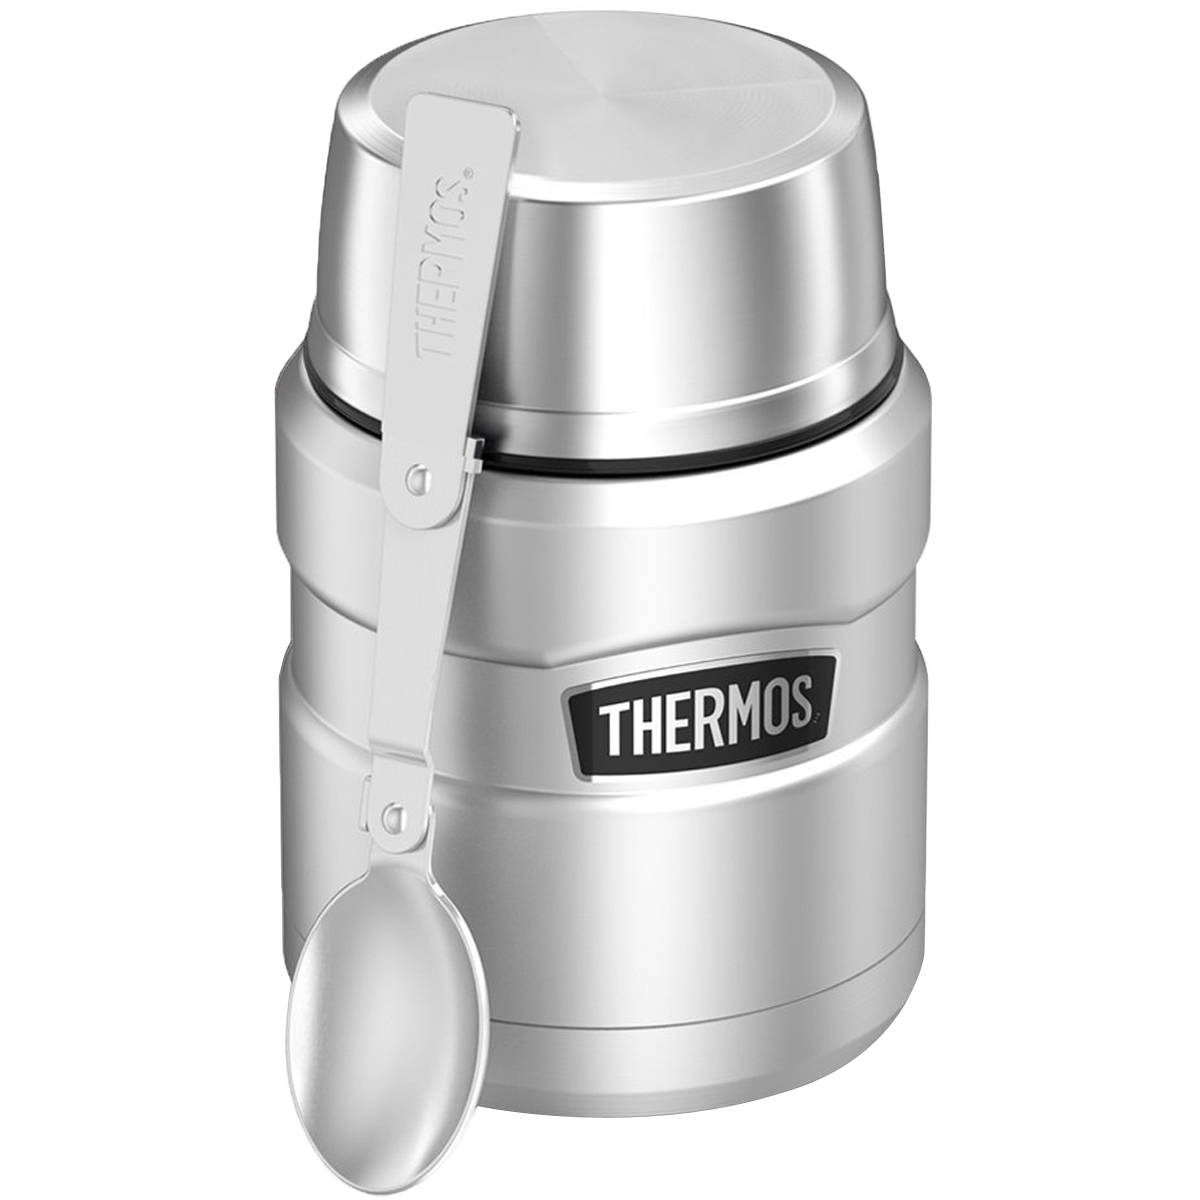 Thermos Stainless King 16 Ounce Food Jar with Folding Spoon, Matte Stainless - image 3 of 5